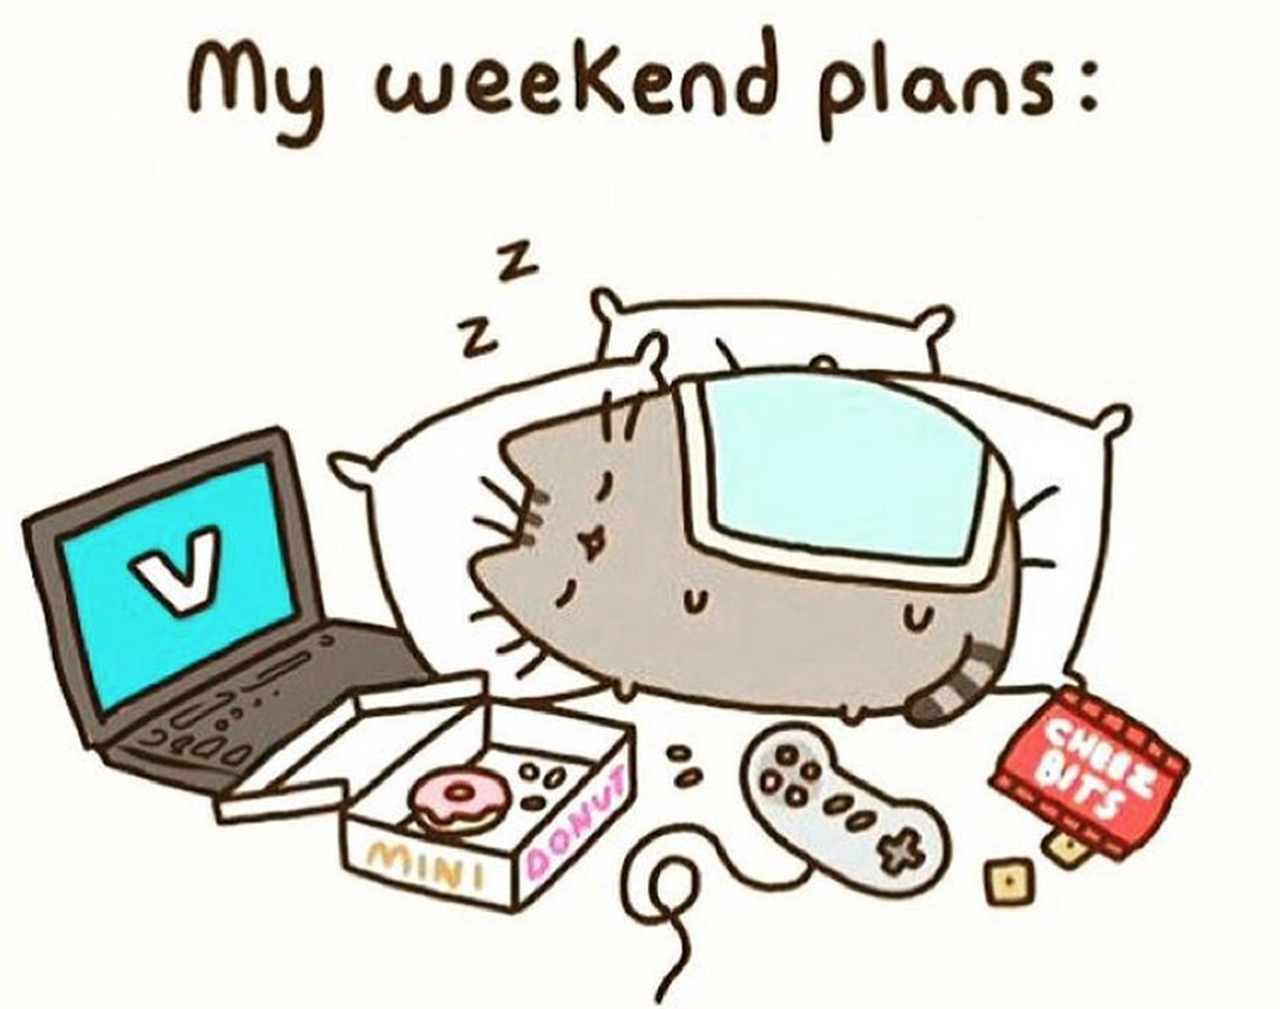 Weekend выходной. My Plans for the weekend. Plans for the weekend. My weekend презентация. Weekends картинки.